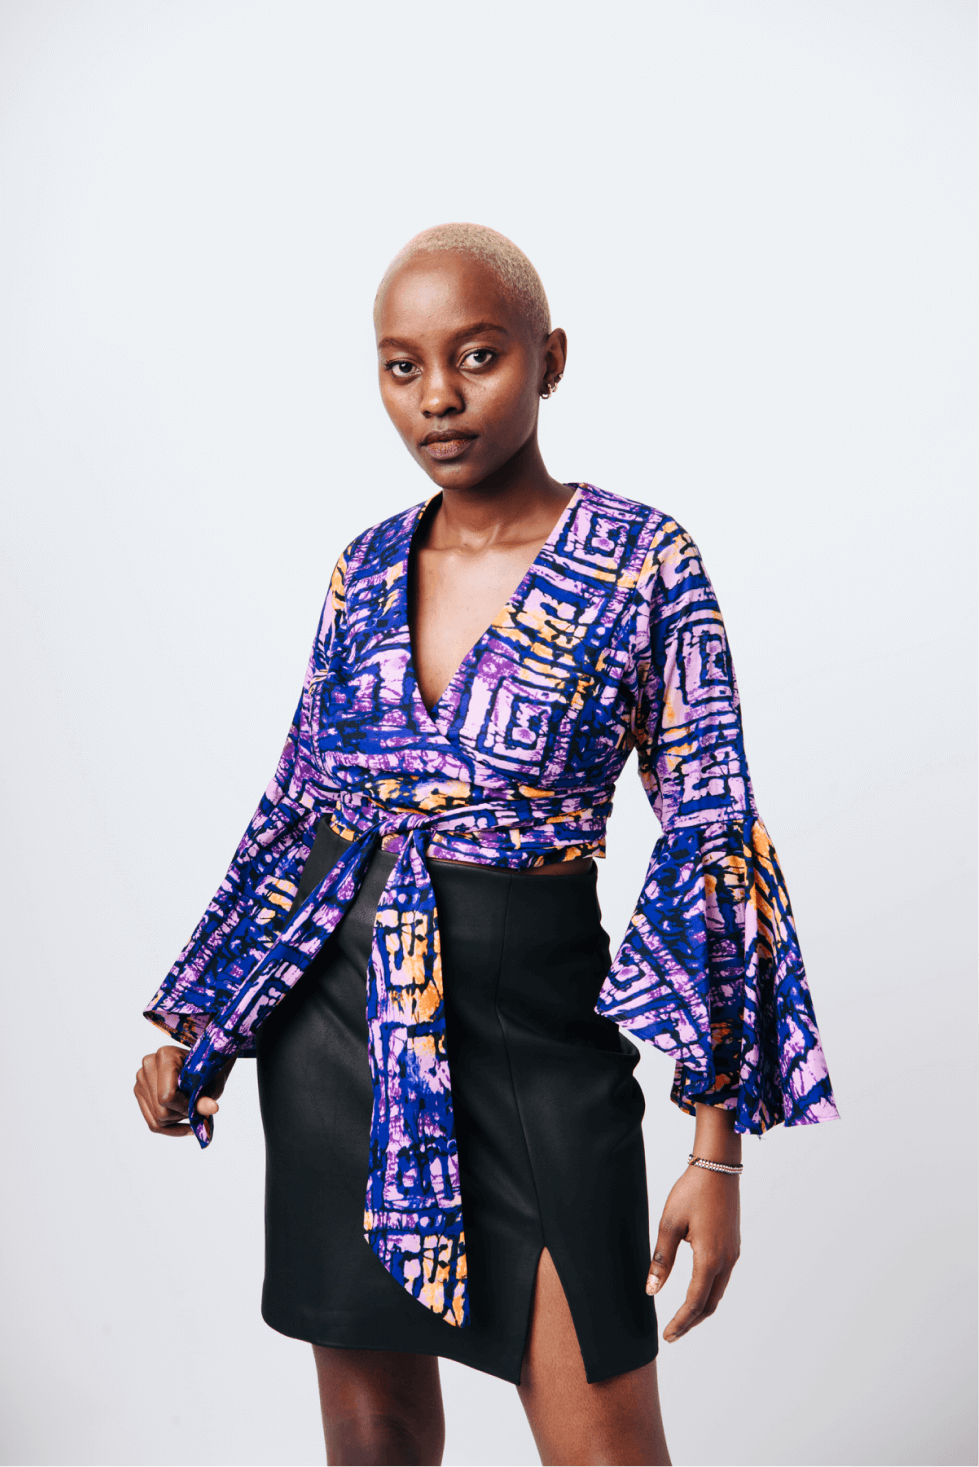 Shop Bell Sleeve Wrap Crop Top by Cyami Custom Fit on Arrai. Discover stylish, affordable clothing, jewelry, handbags and unique handmade pieces from top Kenyan & African fashion brands prioritising sustainability and quality craftsmanship.